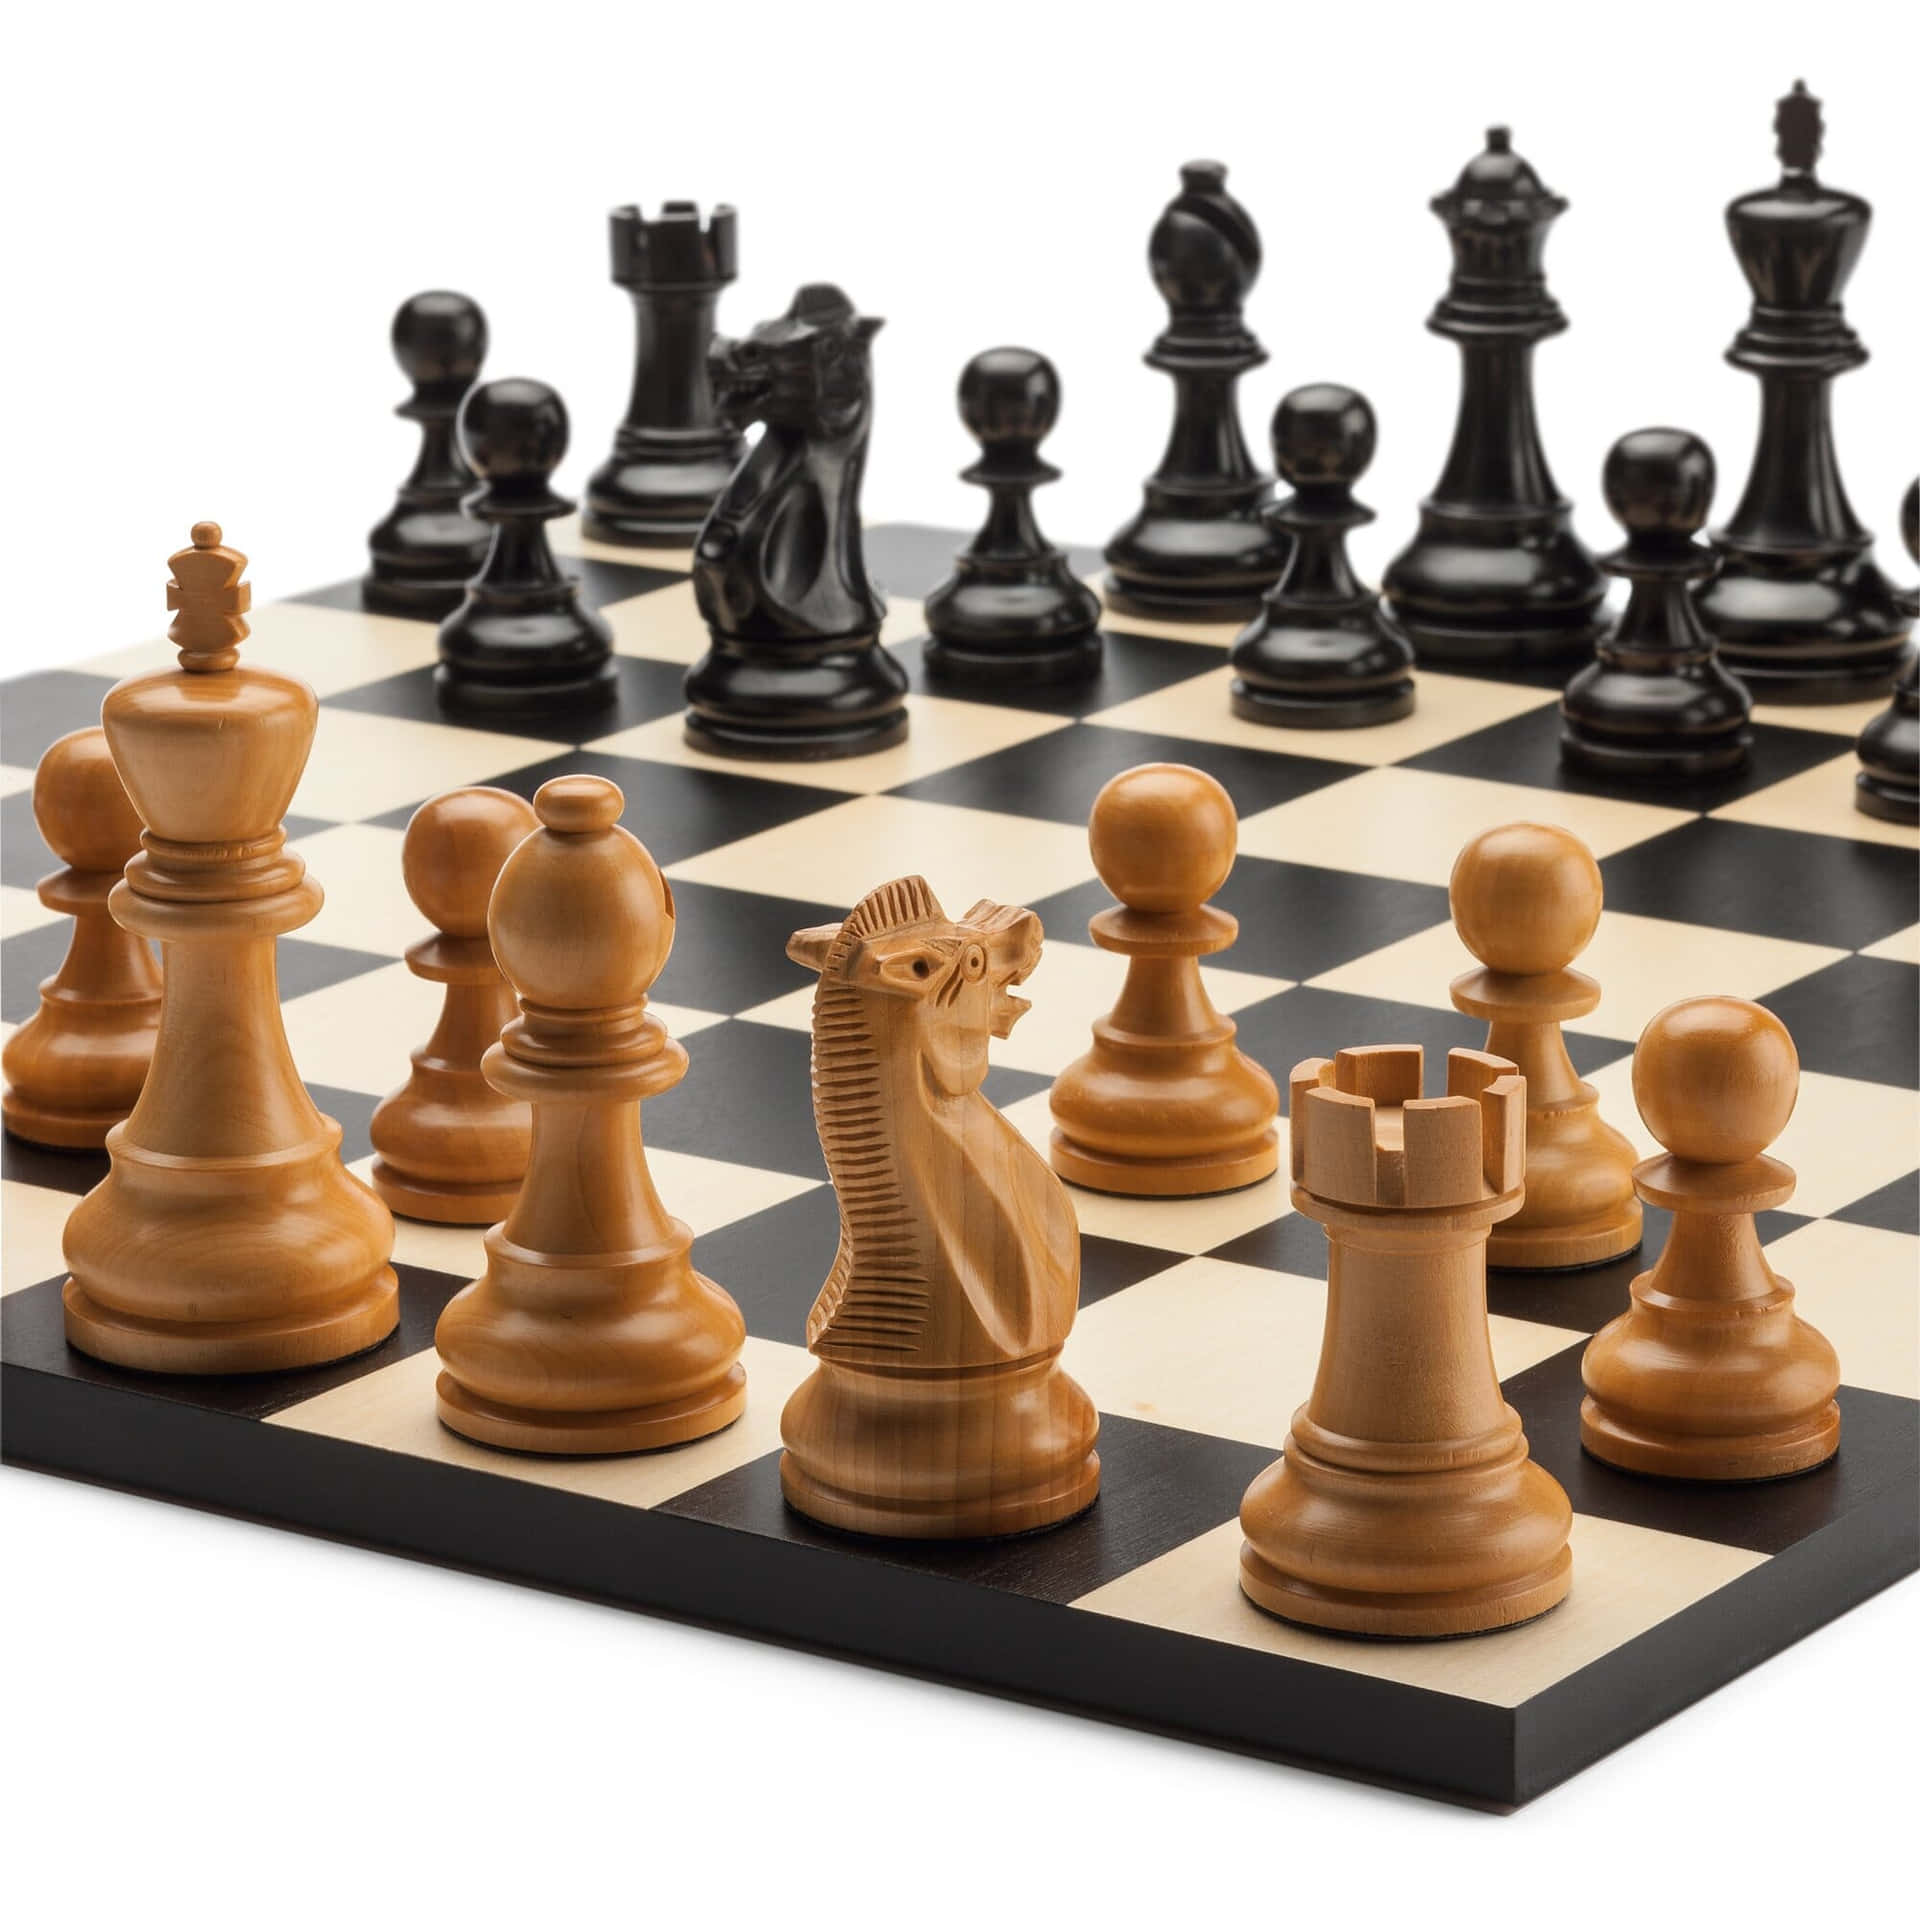 Two Players Engaged In A Capture Game On A Chessboard Background